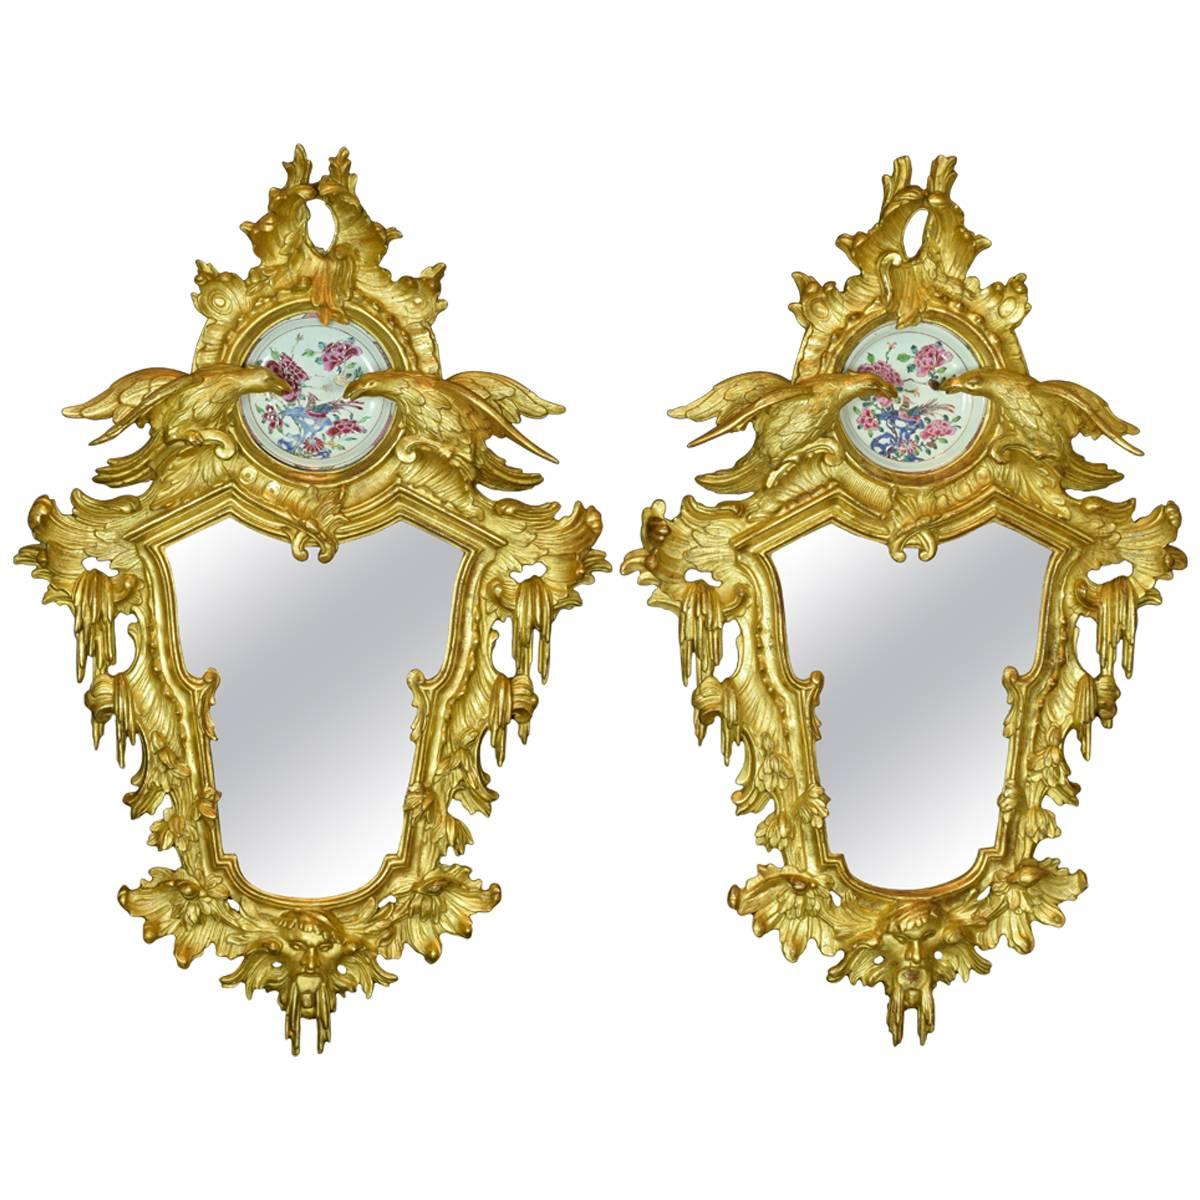 Pair of Giltwood Mirrors with Porcelain, Rococo, 18th Century For Sale